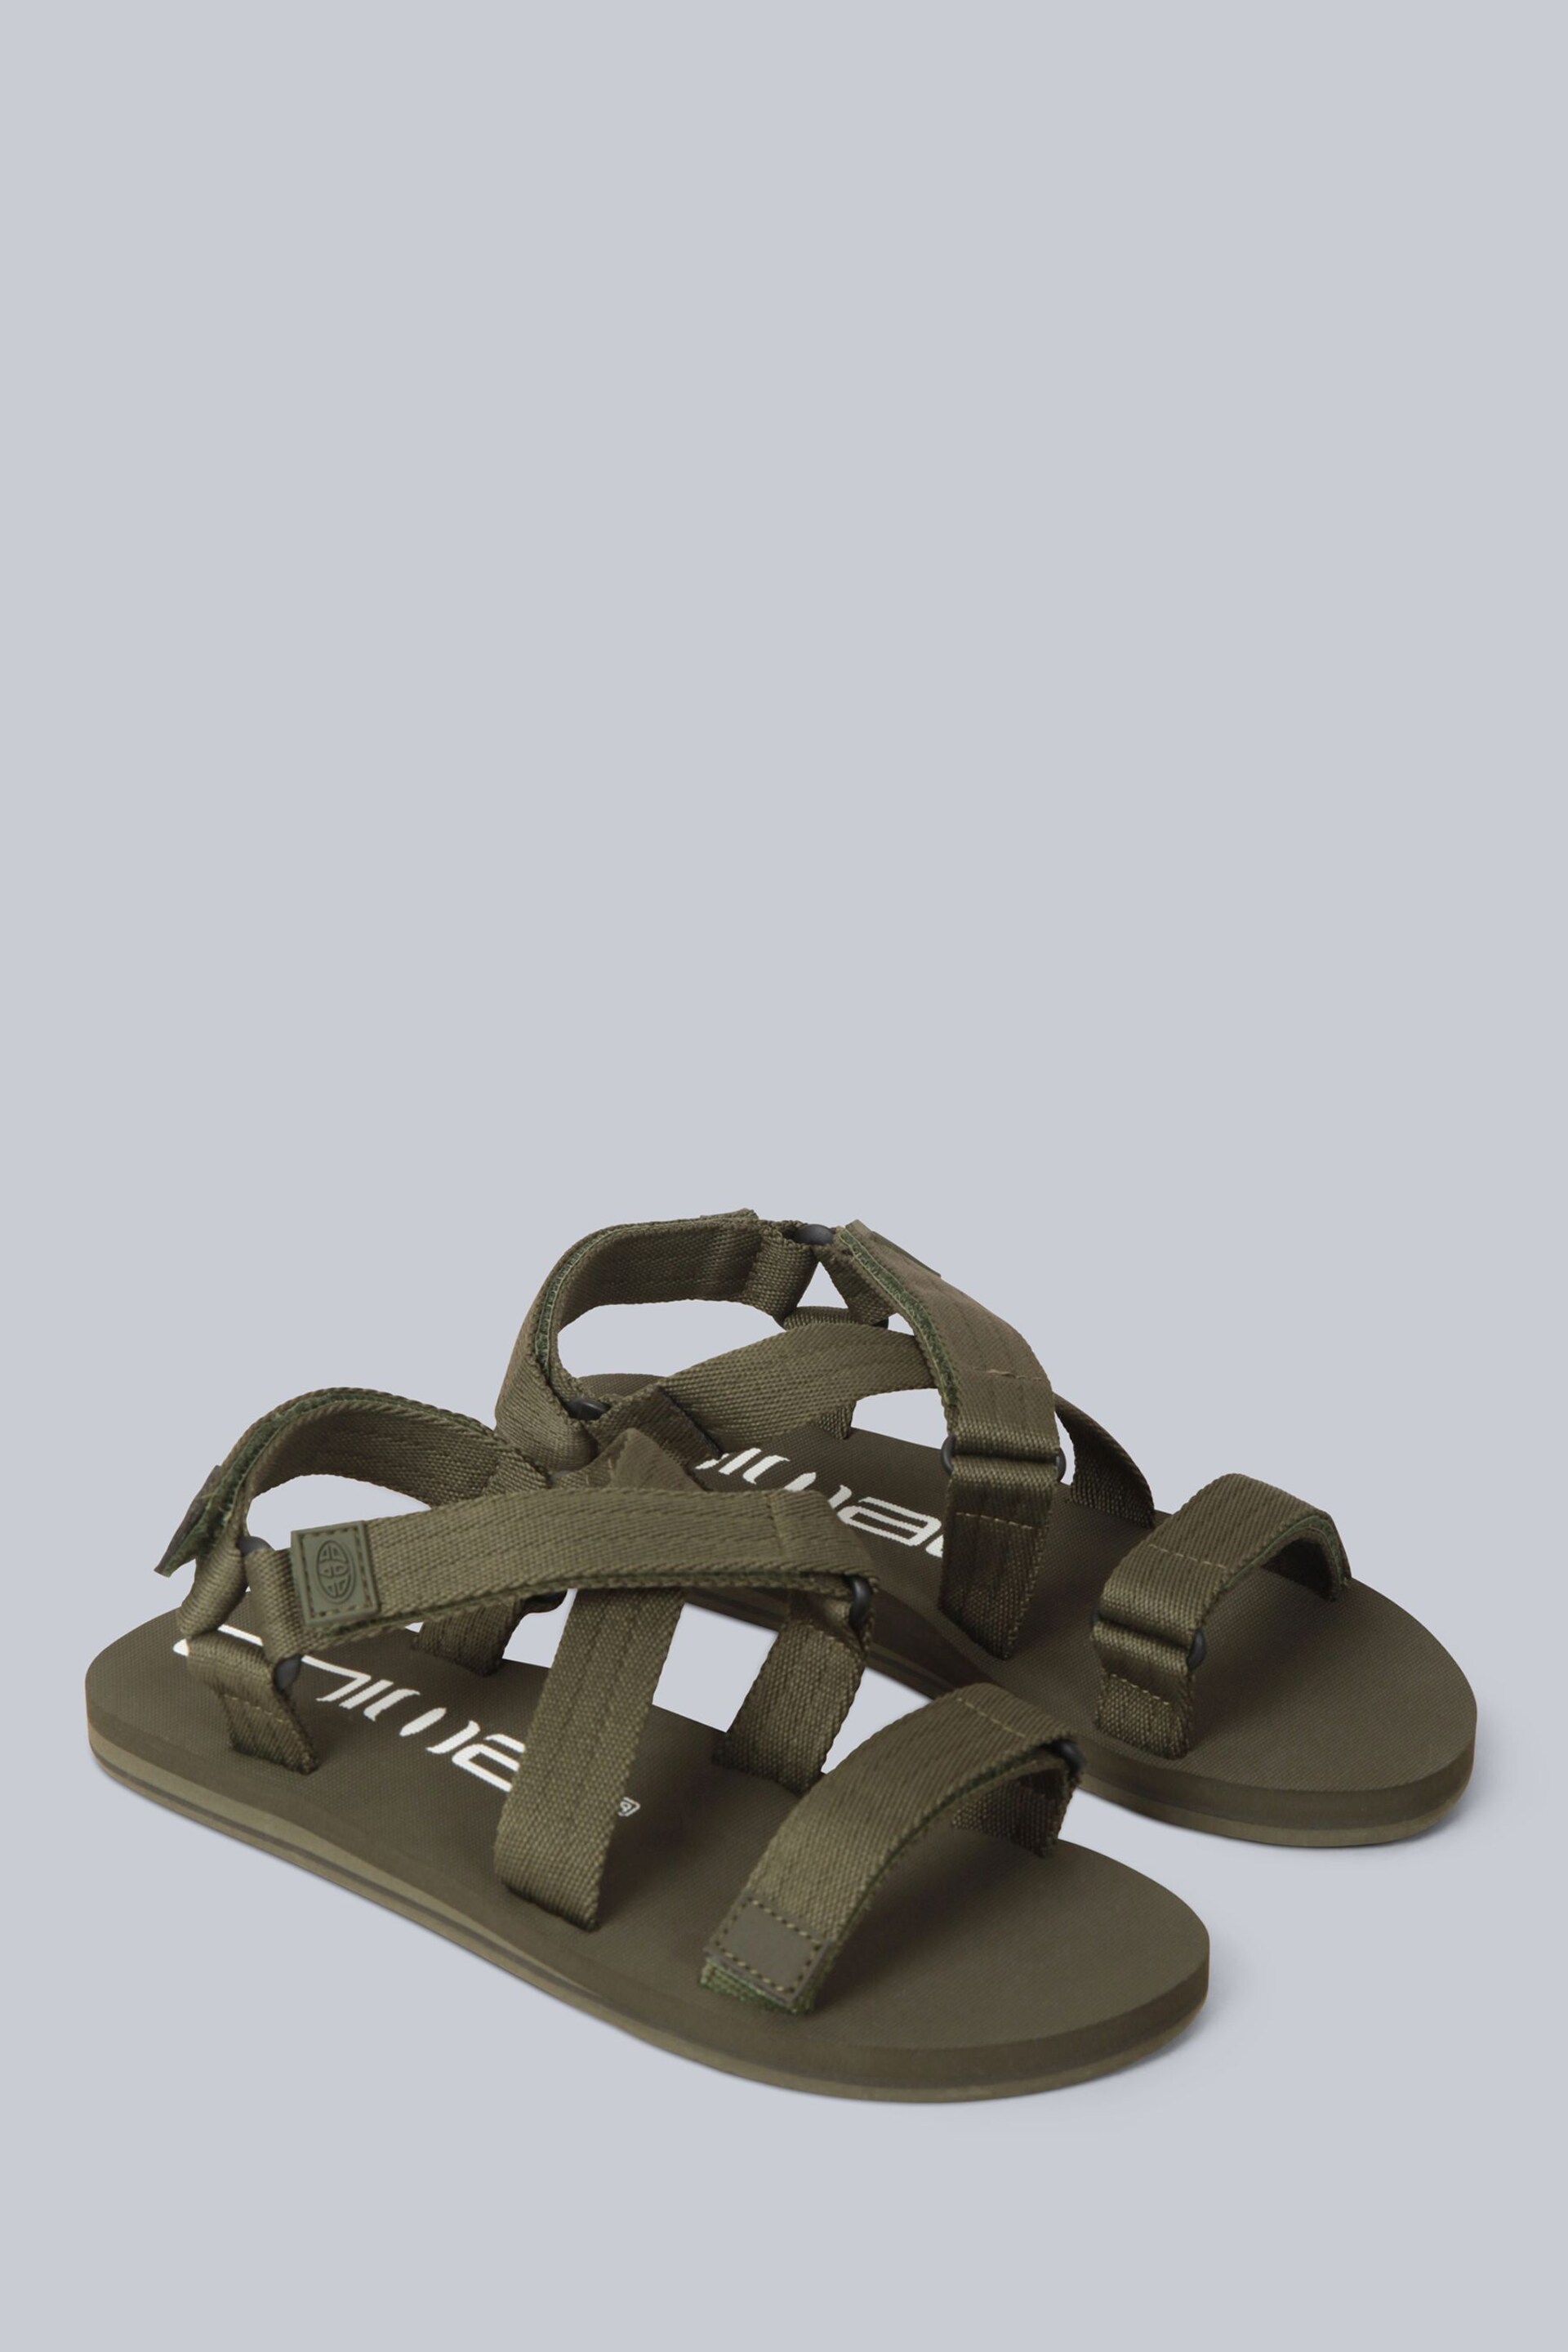 Animal Womens Drift Recycled Sandals - Image 1 of 6